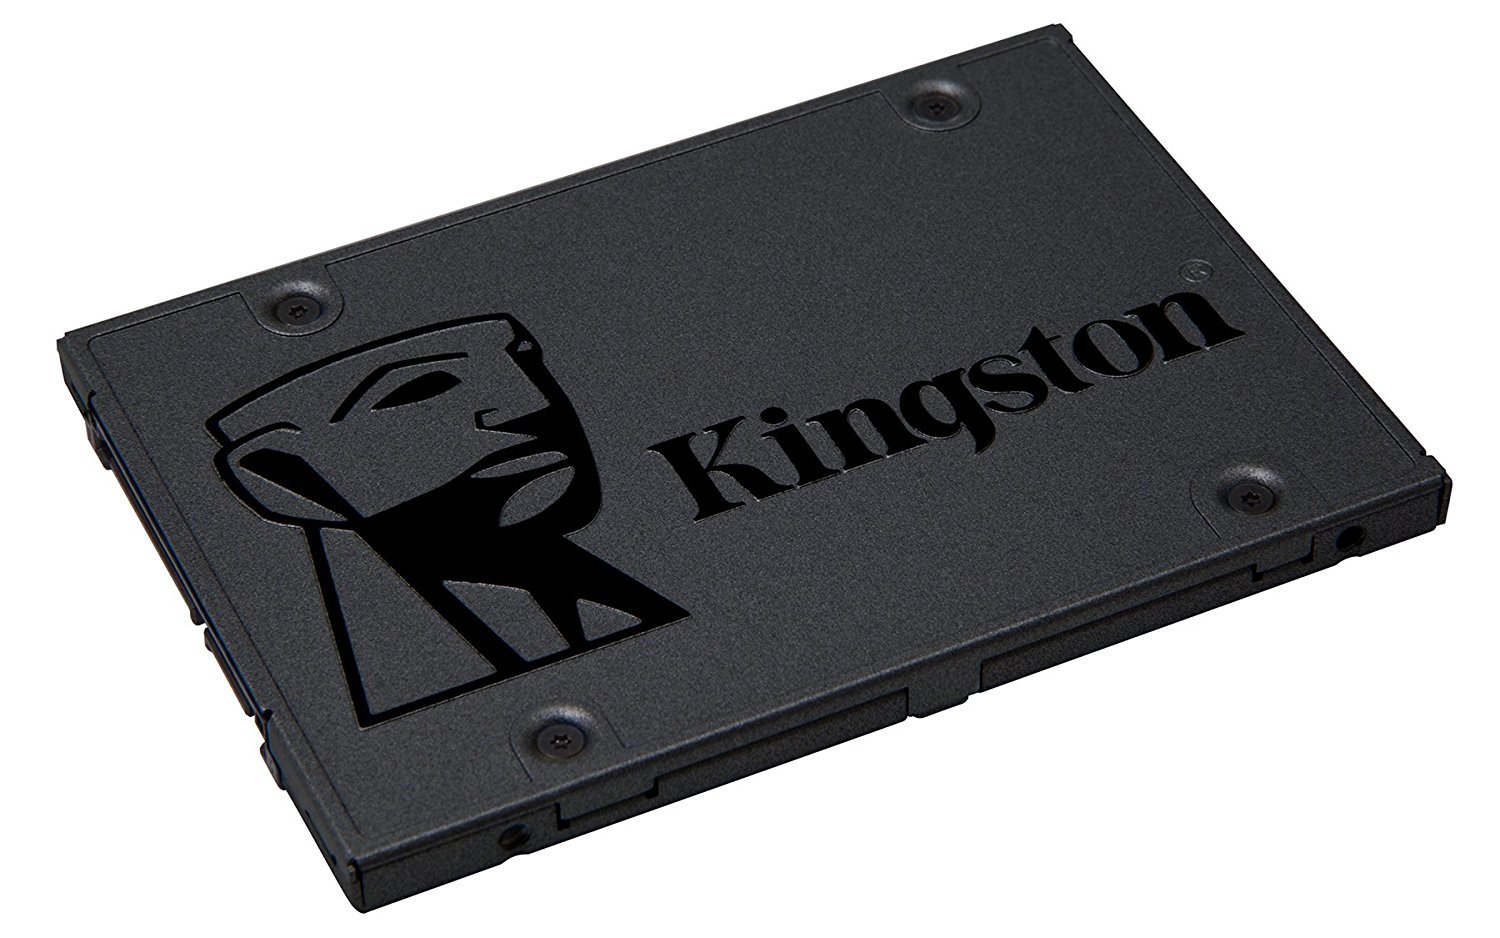 Kingston SSD Now A400 120GB Internal Solid State Drive